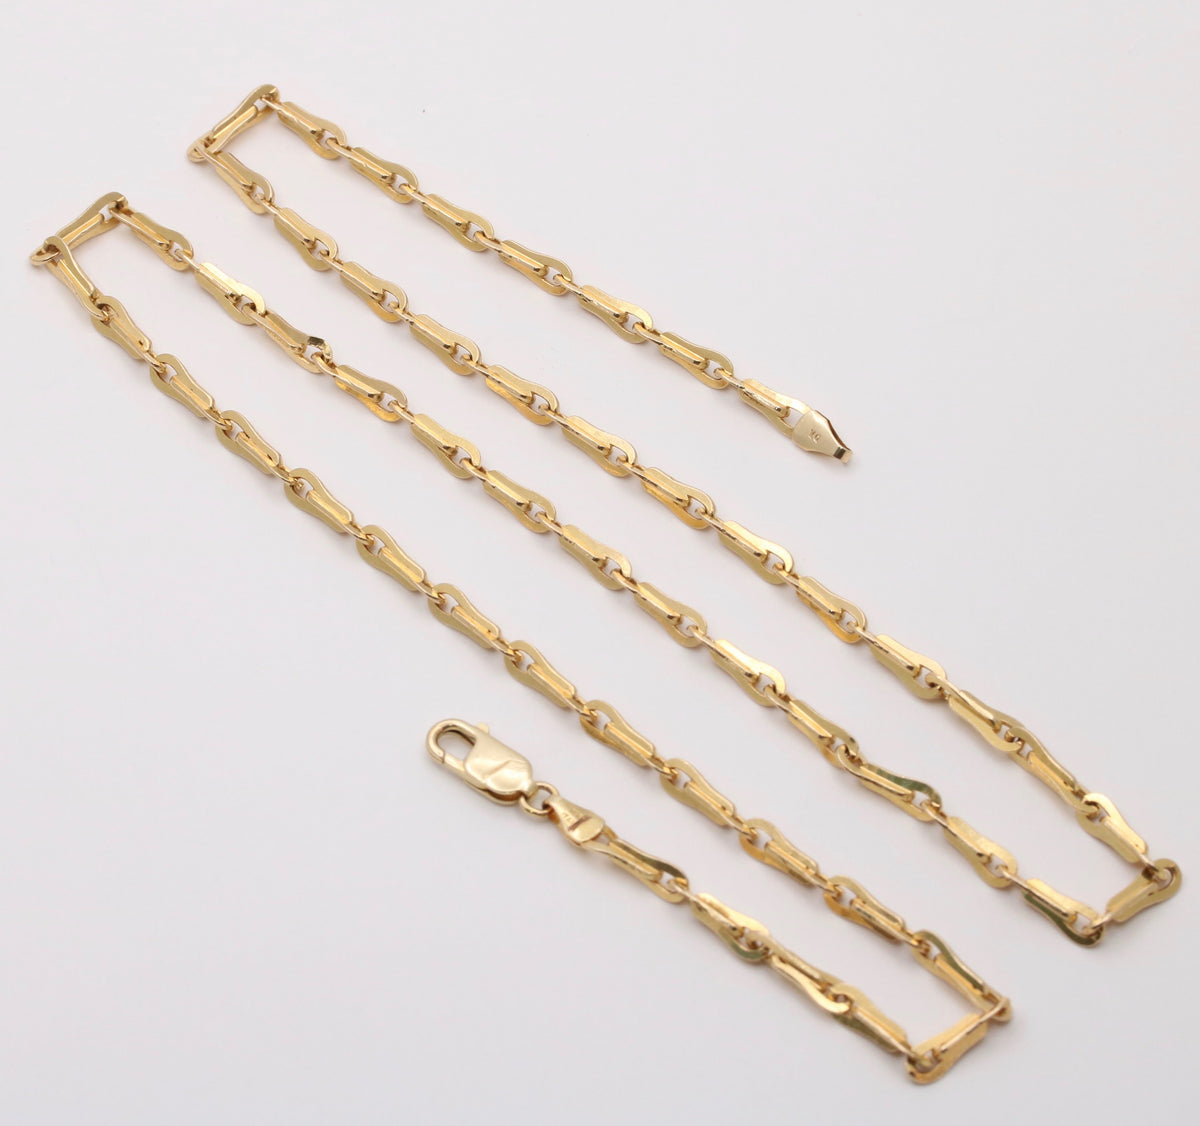 Vintage 14K Gold Avocado Style Link Chain, 24” Long